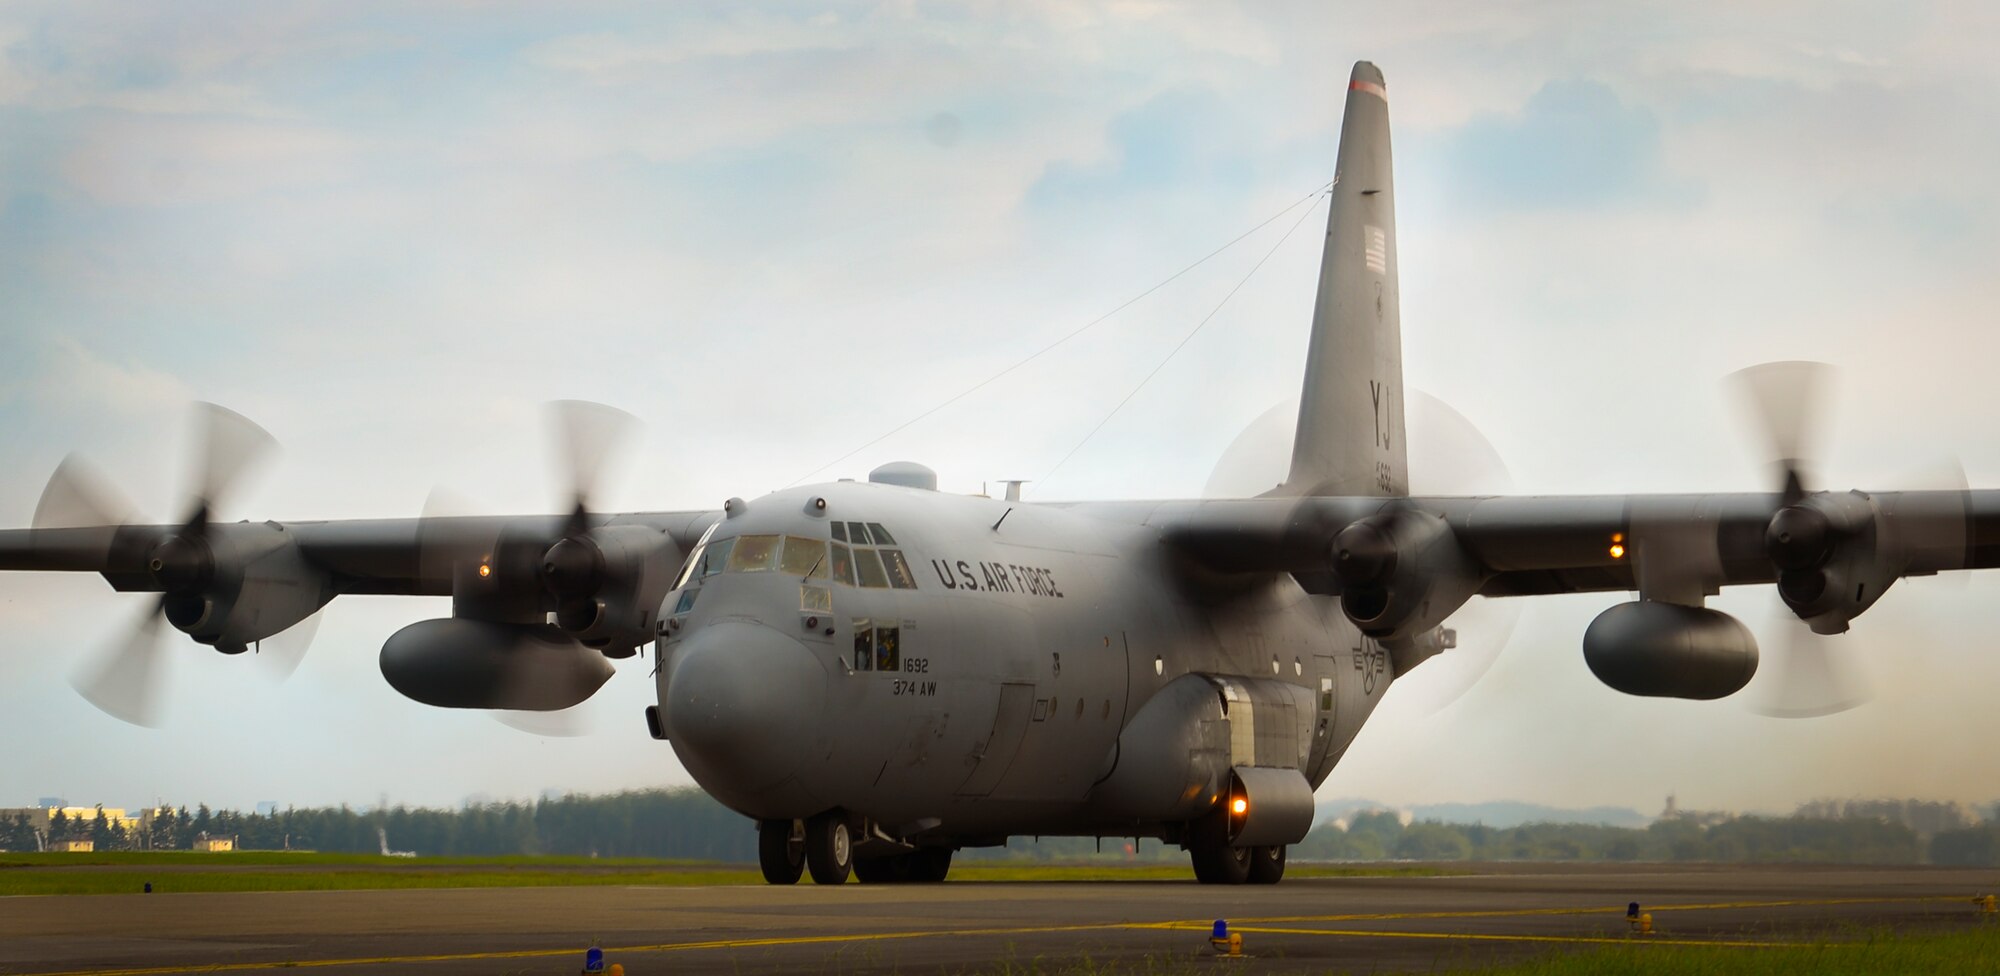 A C-130 Hercules assigned to the 36th Airlift Squadron taxis for takeoff at Yokota Air Base, Japan, Sep. 7, 2016. Yokota’s C-130s continue to conduct theater airlift in support of Pacific Command, which has been the 374th Airlift Wing’s primary mission since the mid-1970s. (U.S. Air Force Photo by Airman 1st Class Baker/Released)